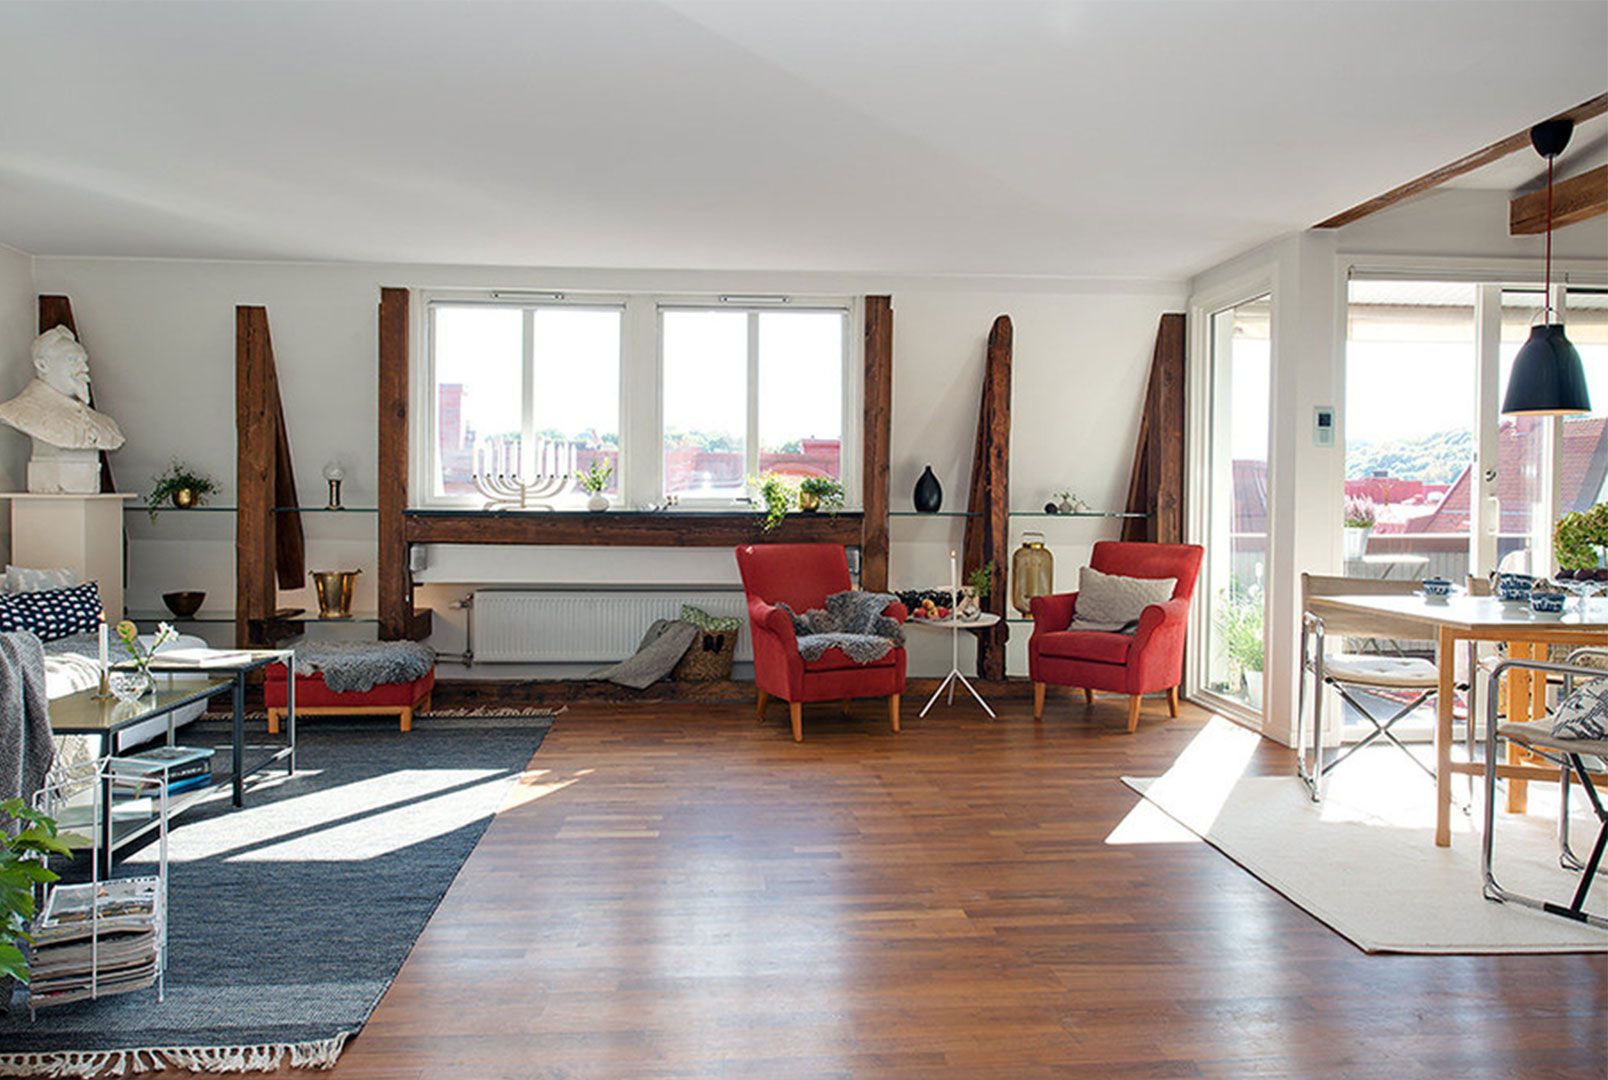 Red Accent Chairs Design Plus Chic Laminate Wood Floor Idea Feat Whimsical Atlanta Apartment Picture (Photo 2659 of 7825)